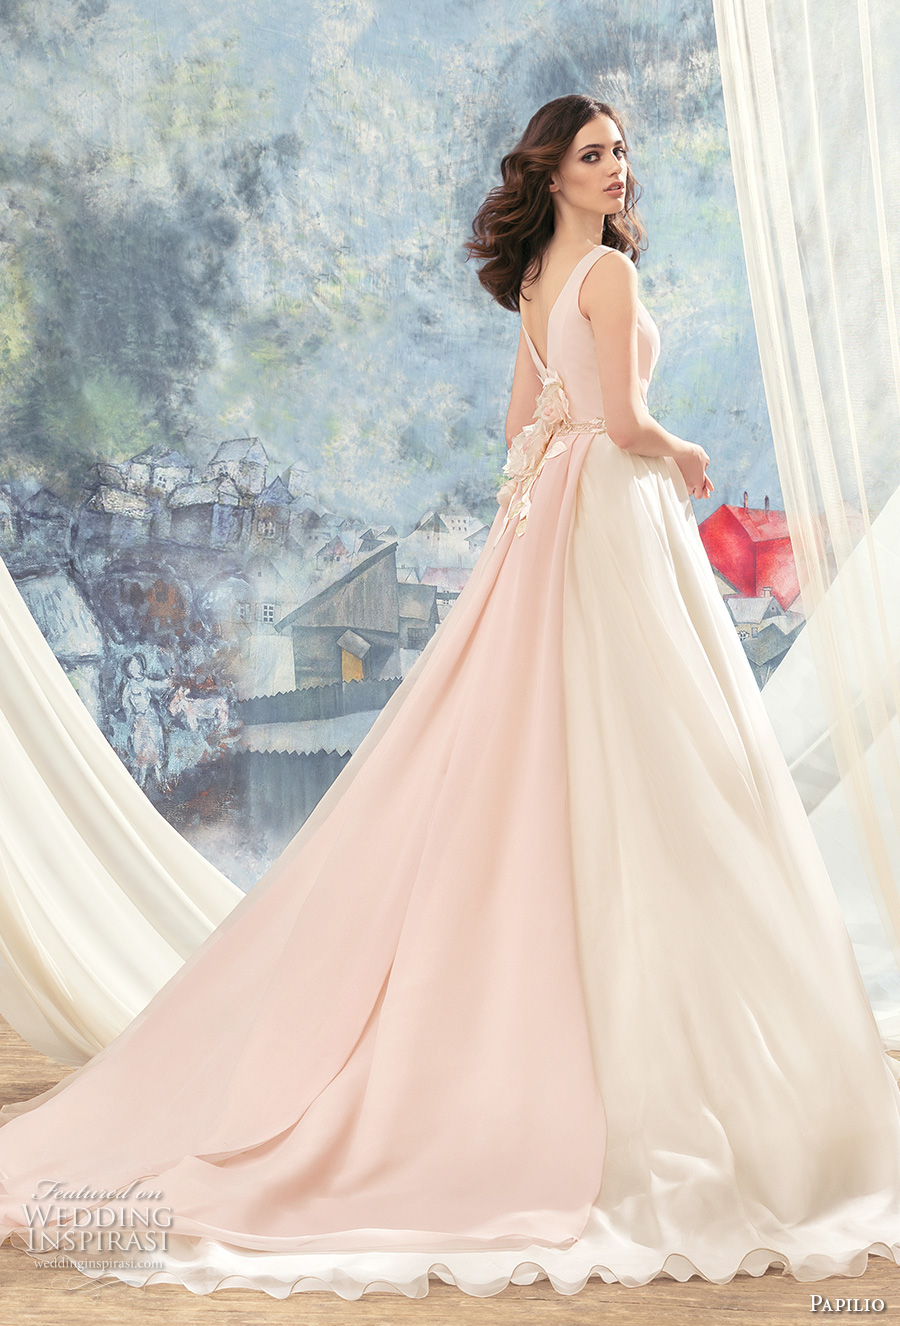 papilio 2017 bridal sleeveless v neck wrap over ruched bodice pink top princess ball gown a  line wedding dress v back chapel train (flamingo) bv